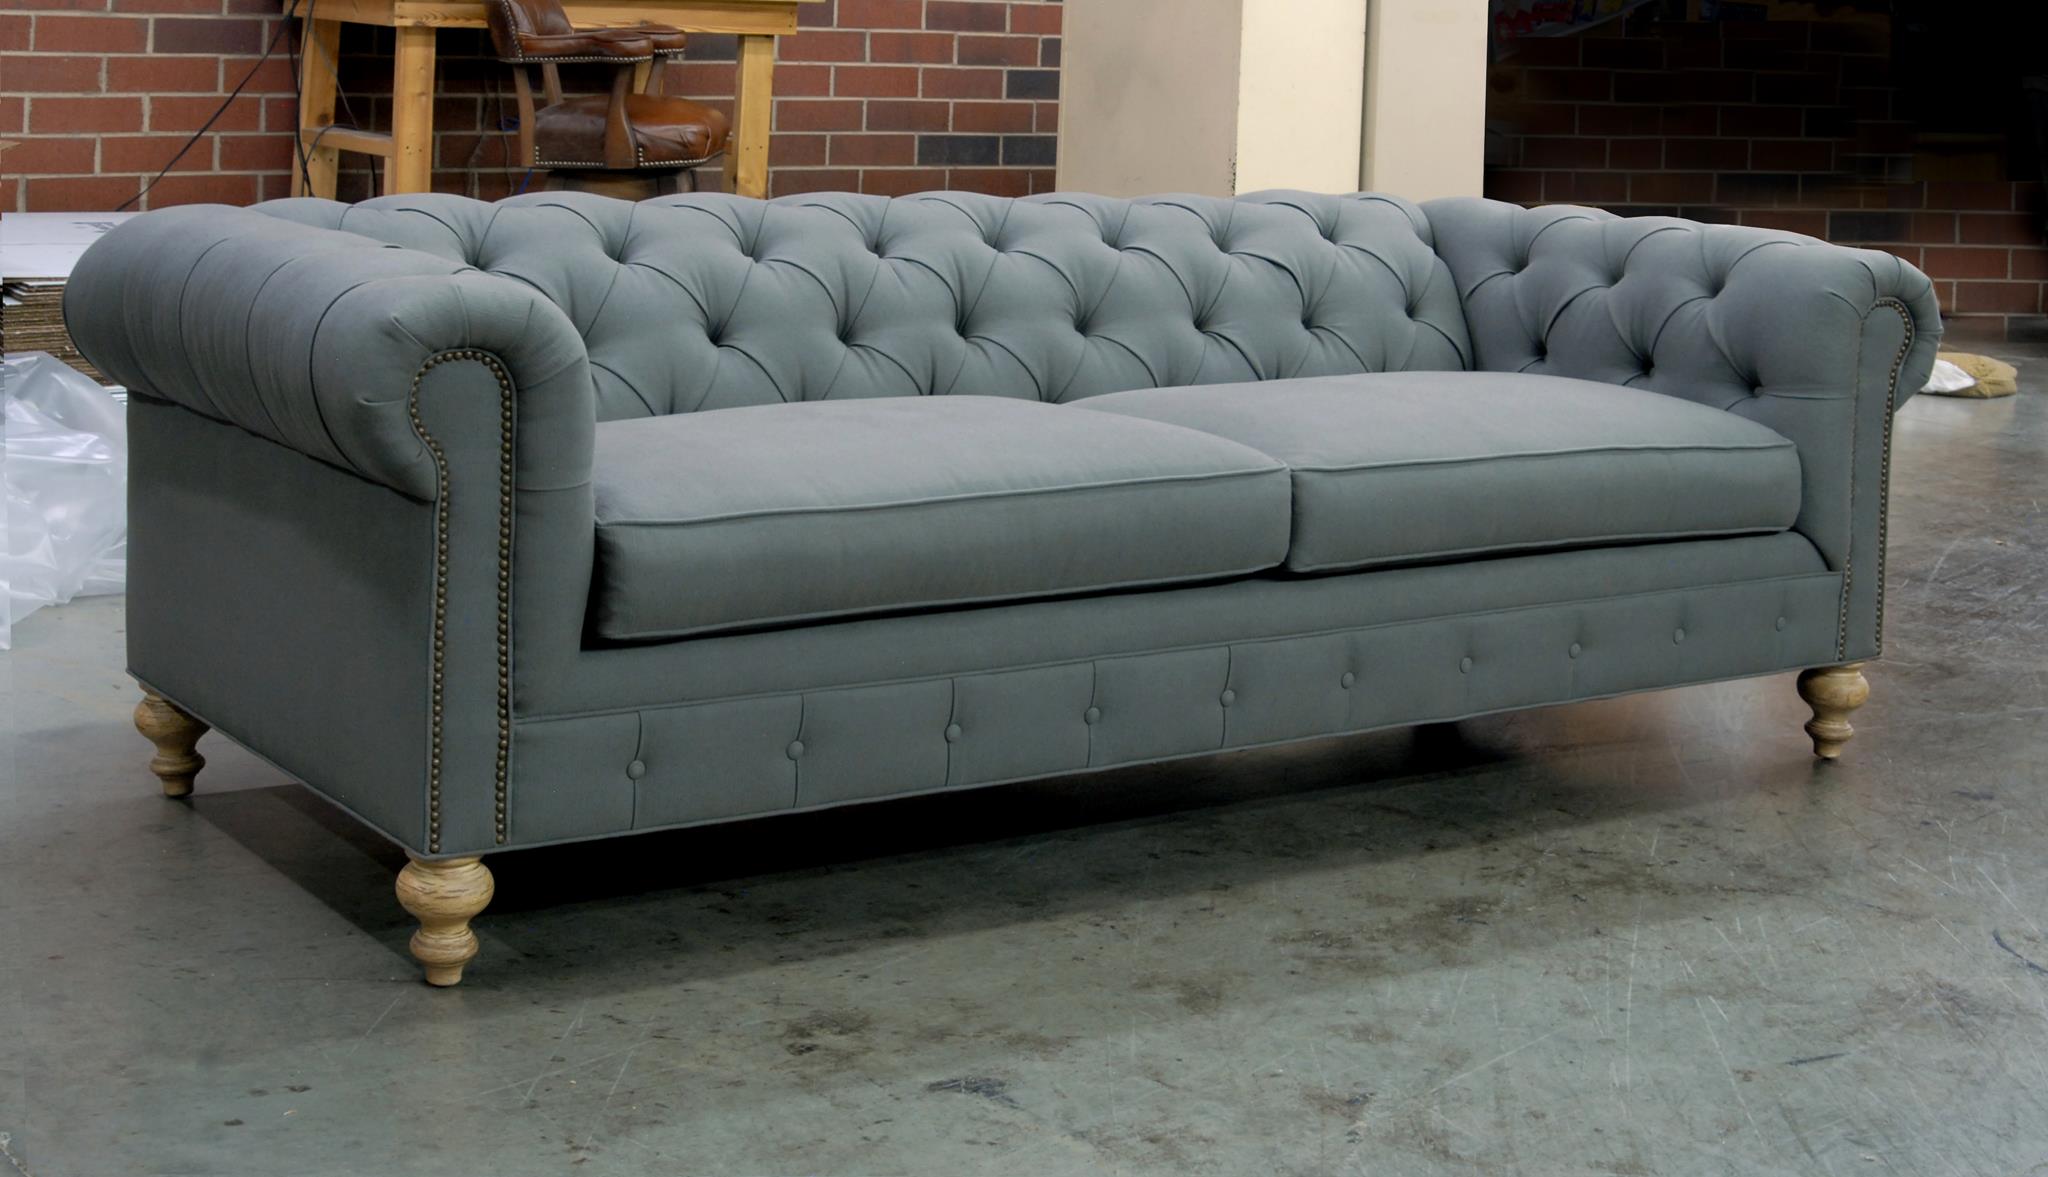 Fitzgerald Classic Chesterfield Sofa in Grey Fabric